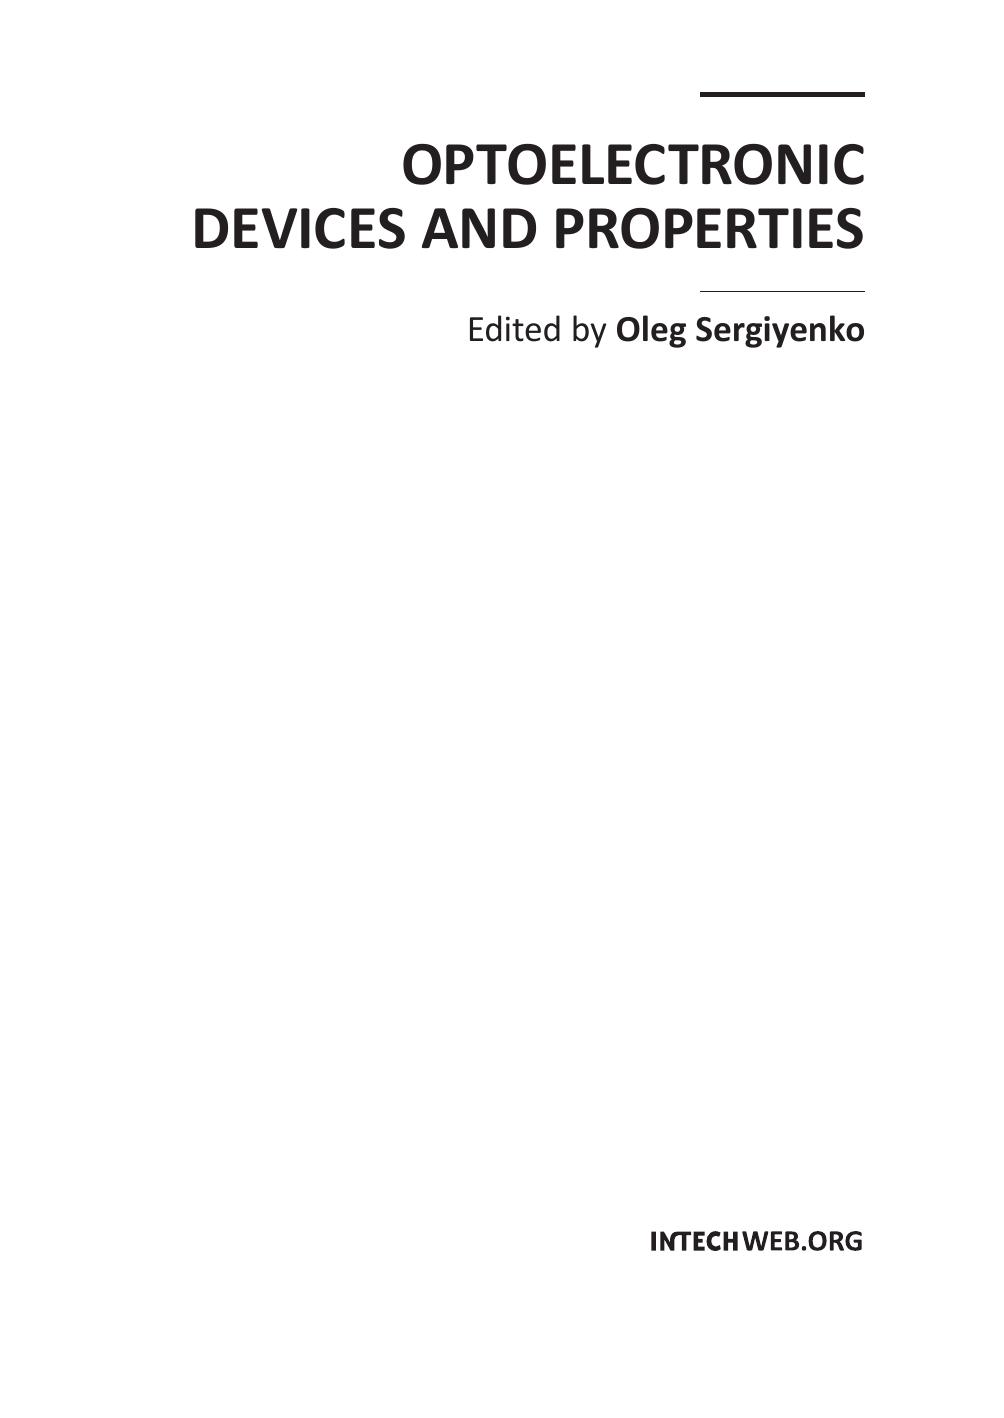 Optoelectronic Devices and Properties.indd